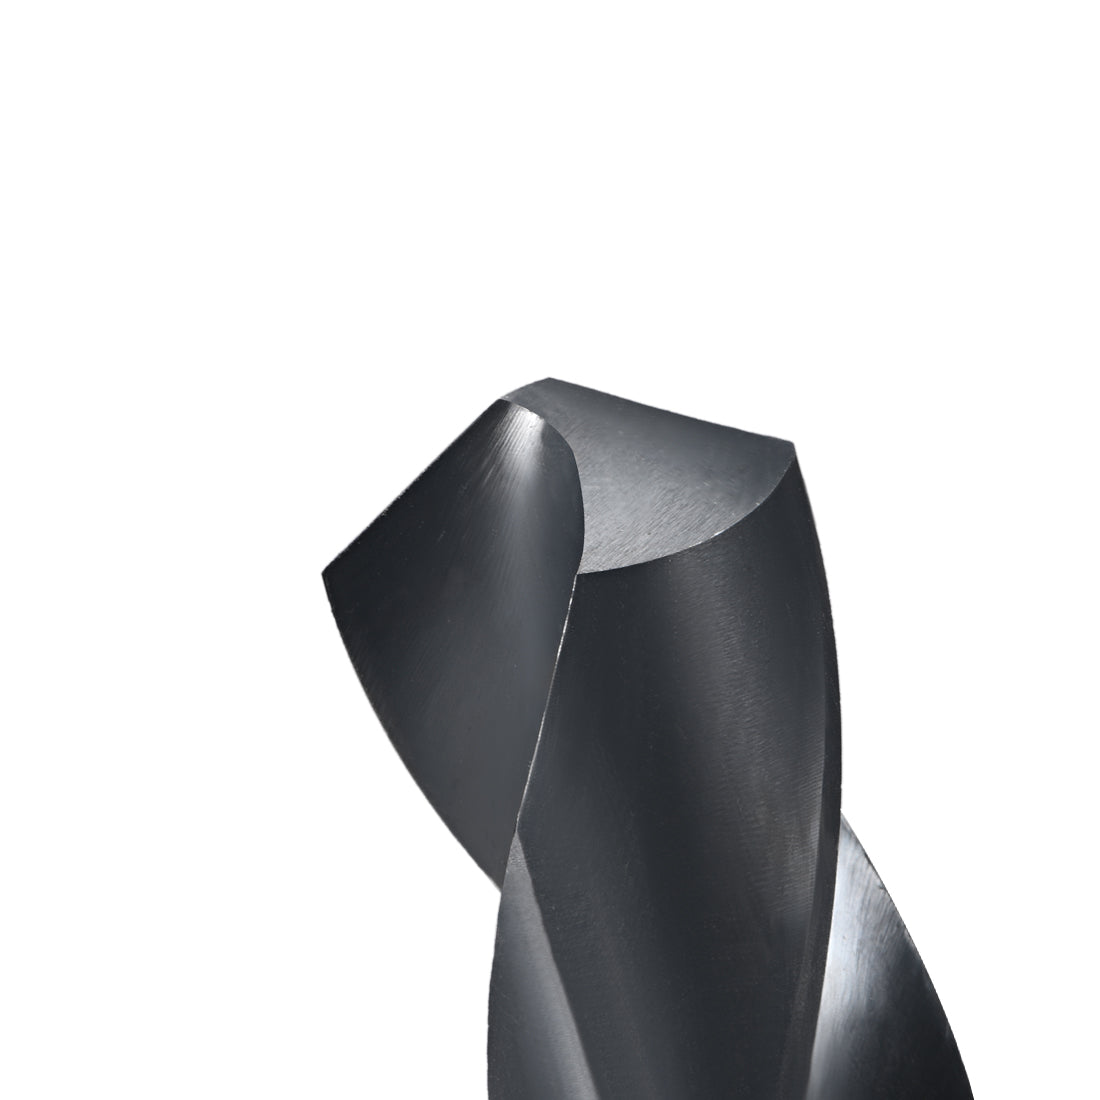 uxcell Uxcell Reduced Shank Drill Bit 24mm HSS 6542 Black Oxide with 1/2 Inch Straight Shank